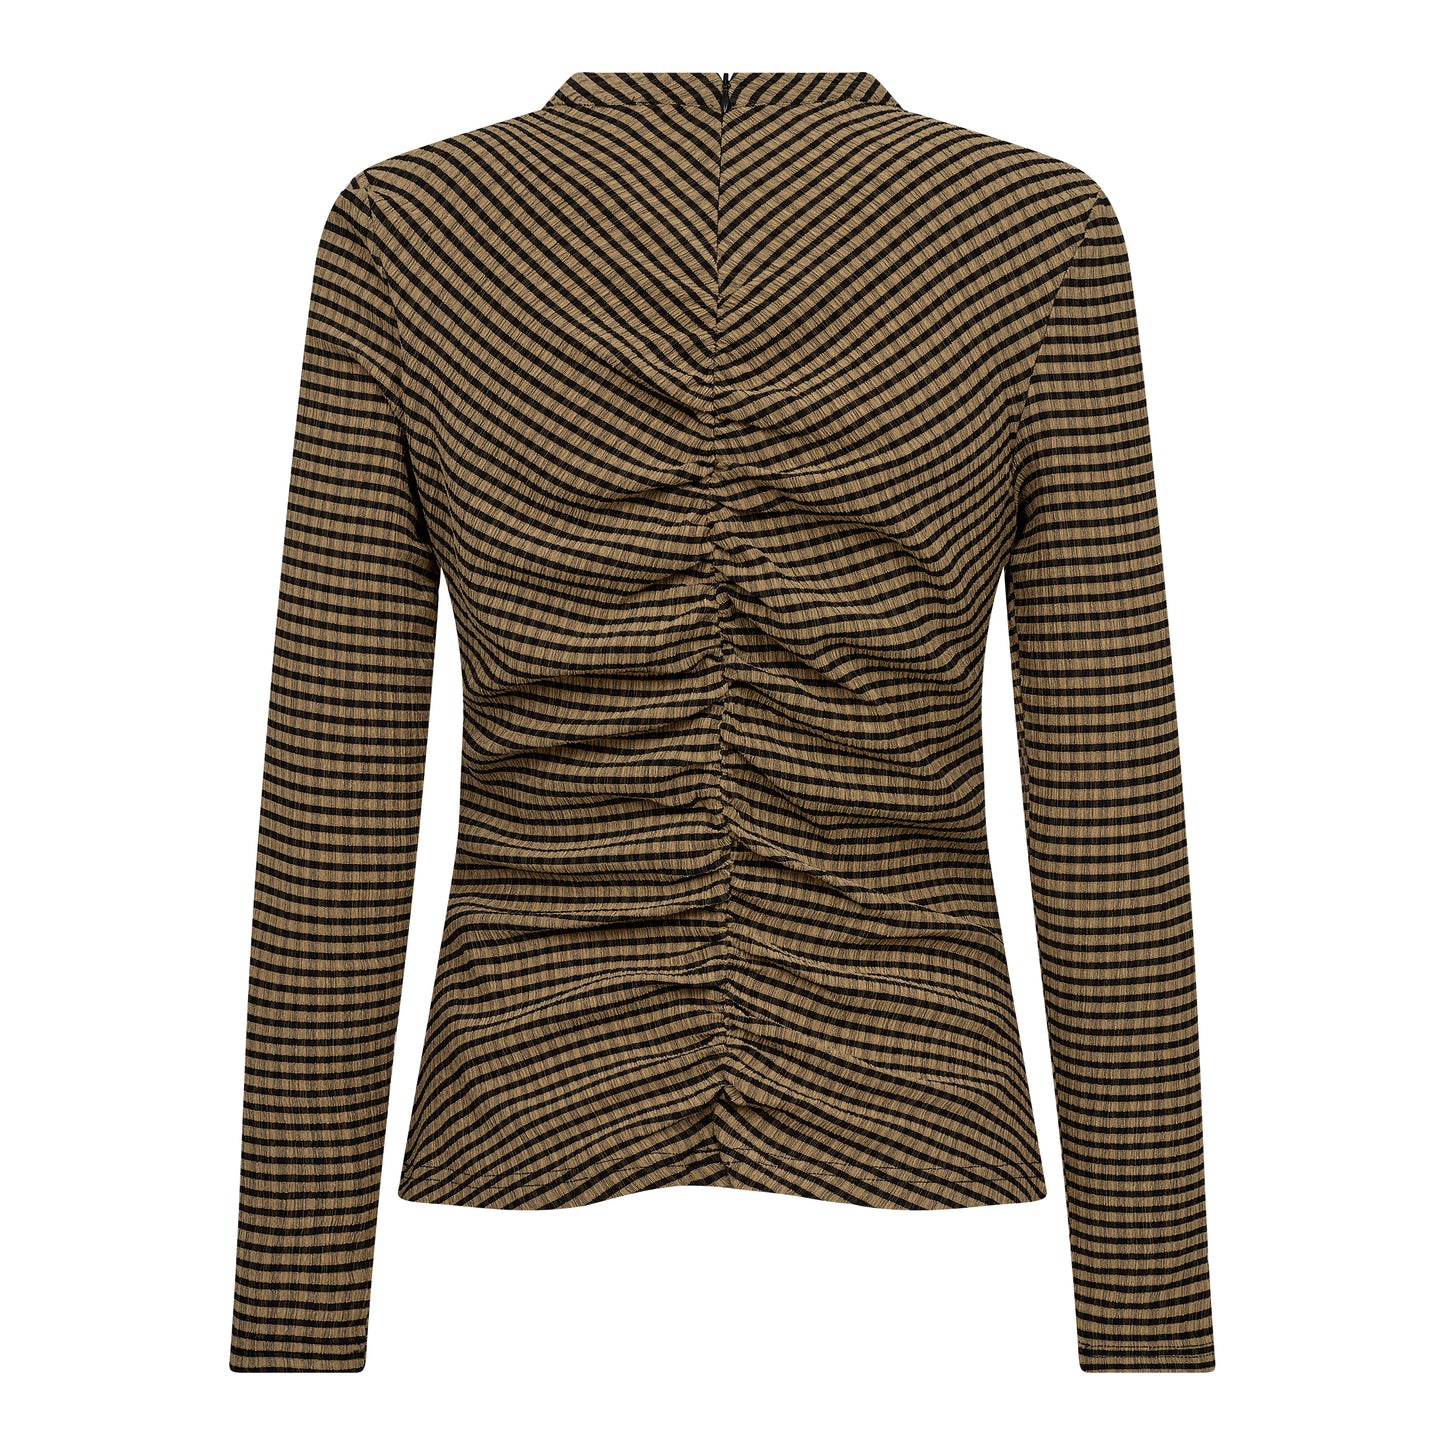 Cocouture - NovaCC Blouse - Toffee